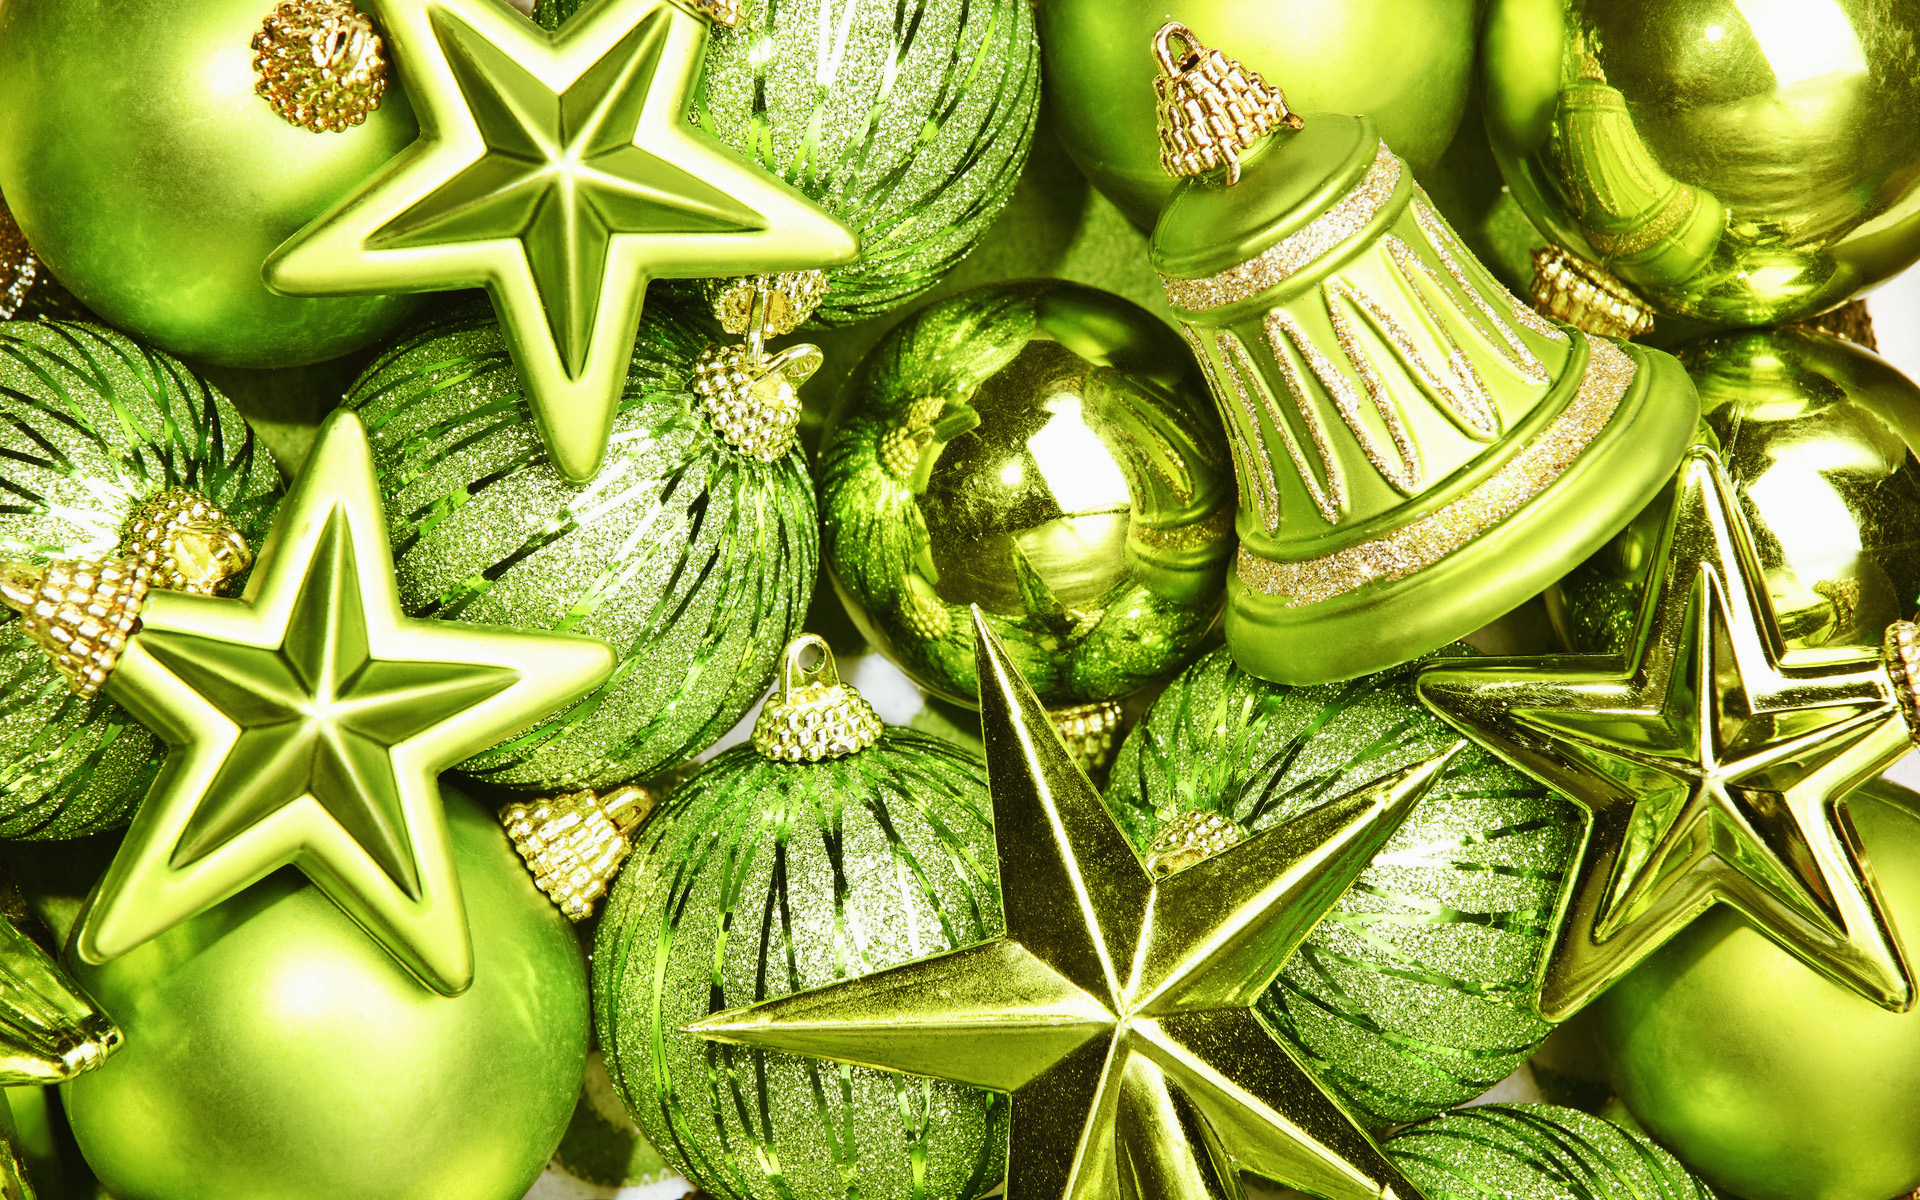 Download wallpaper green xmas decorations, Happy New year, green balls, green bells, Merry Christmas, Xmas, Christmas decorations for desktop with resolution 1920x1200. High Quality HD picture wallpaper